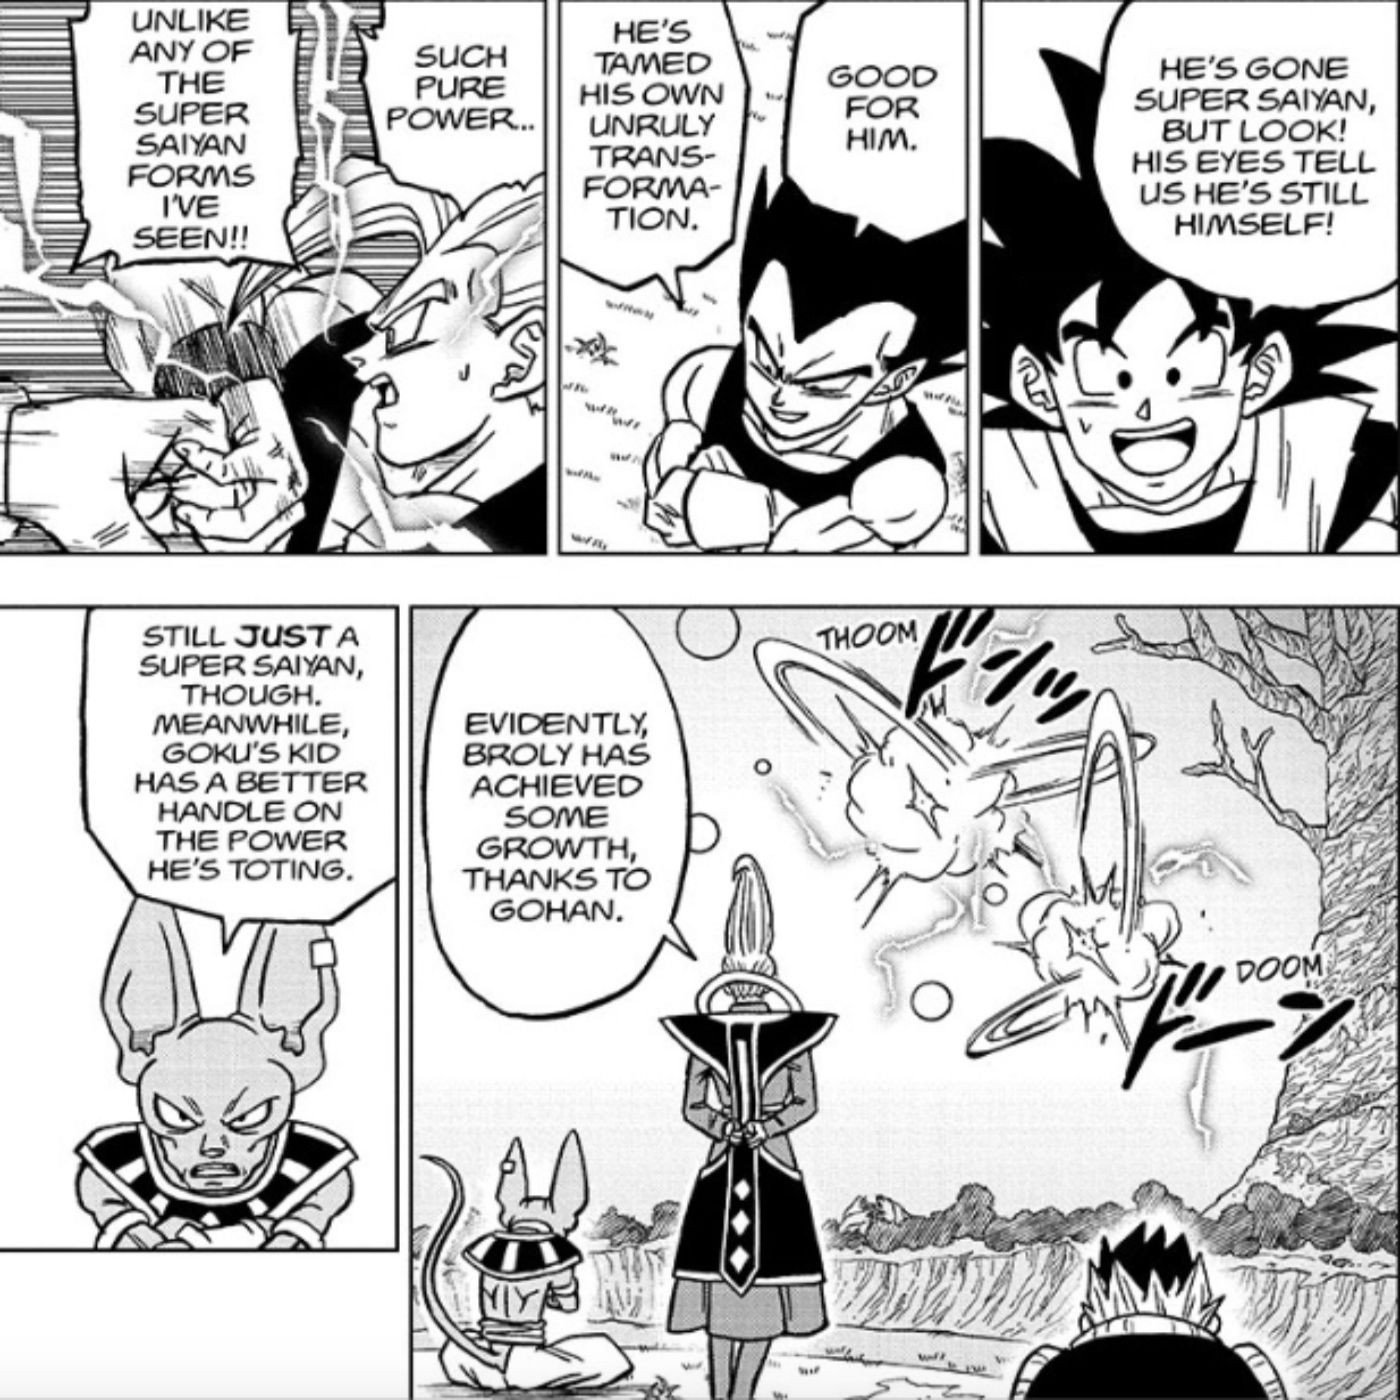 Goku, Vegeta, Beerus, and Whis explaining that Broly is now in control of his power thanks to Gohan.